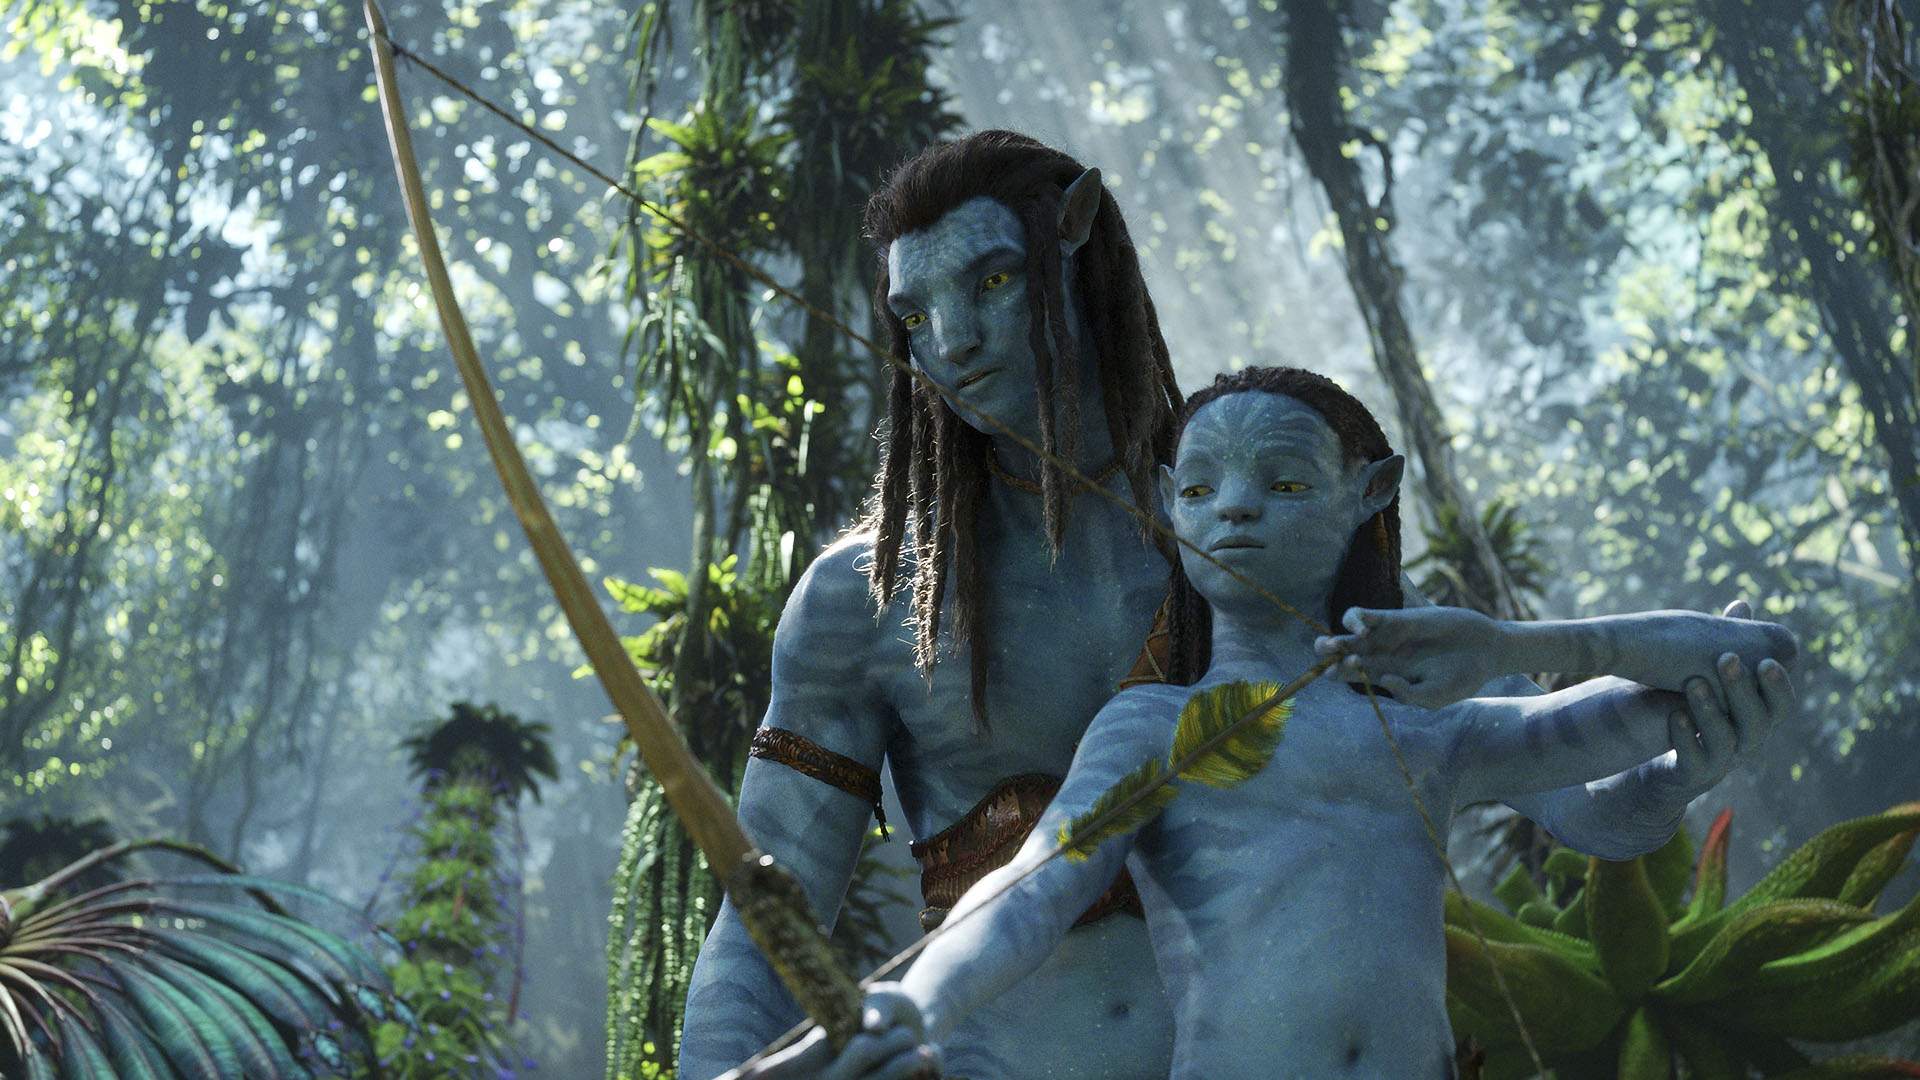 Return to Pandora: James Cameron's 'Avatar' Sequel 'The Way of Water' Just Dropped Its Full Trailer